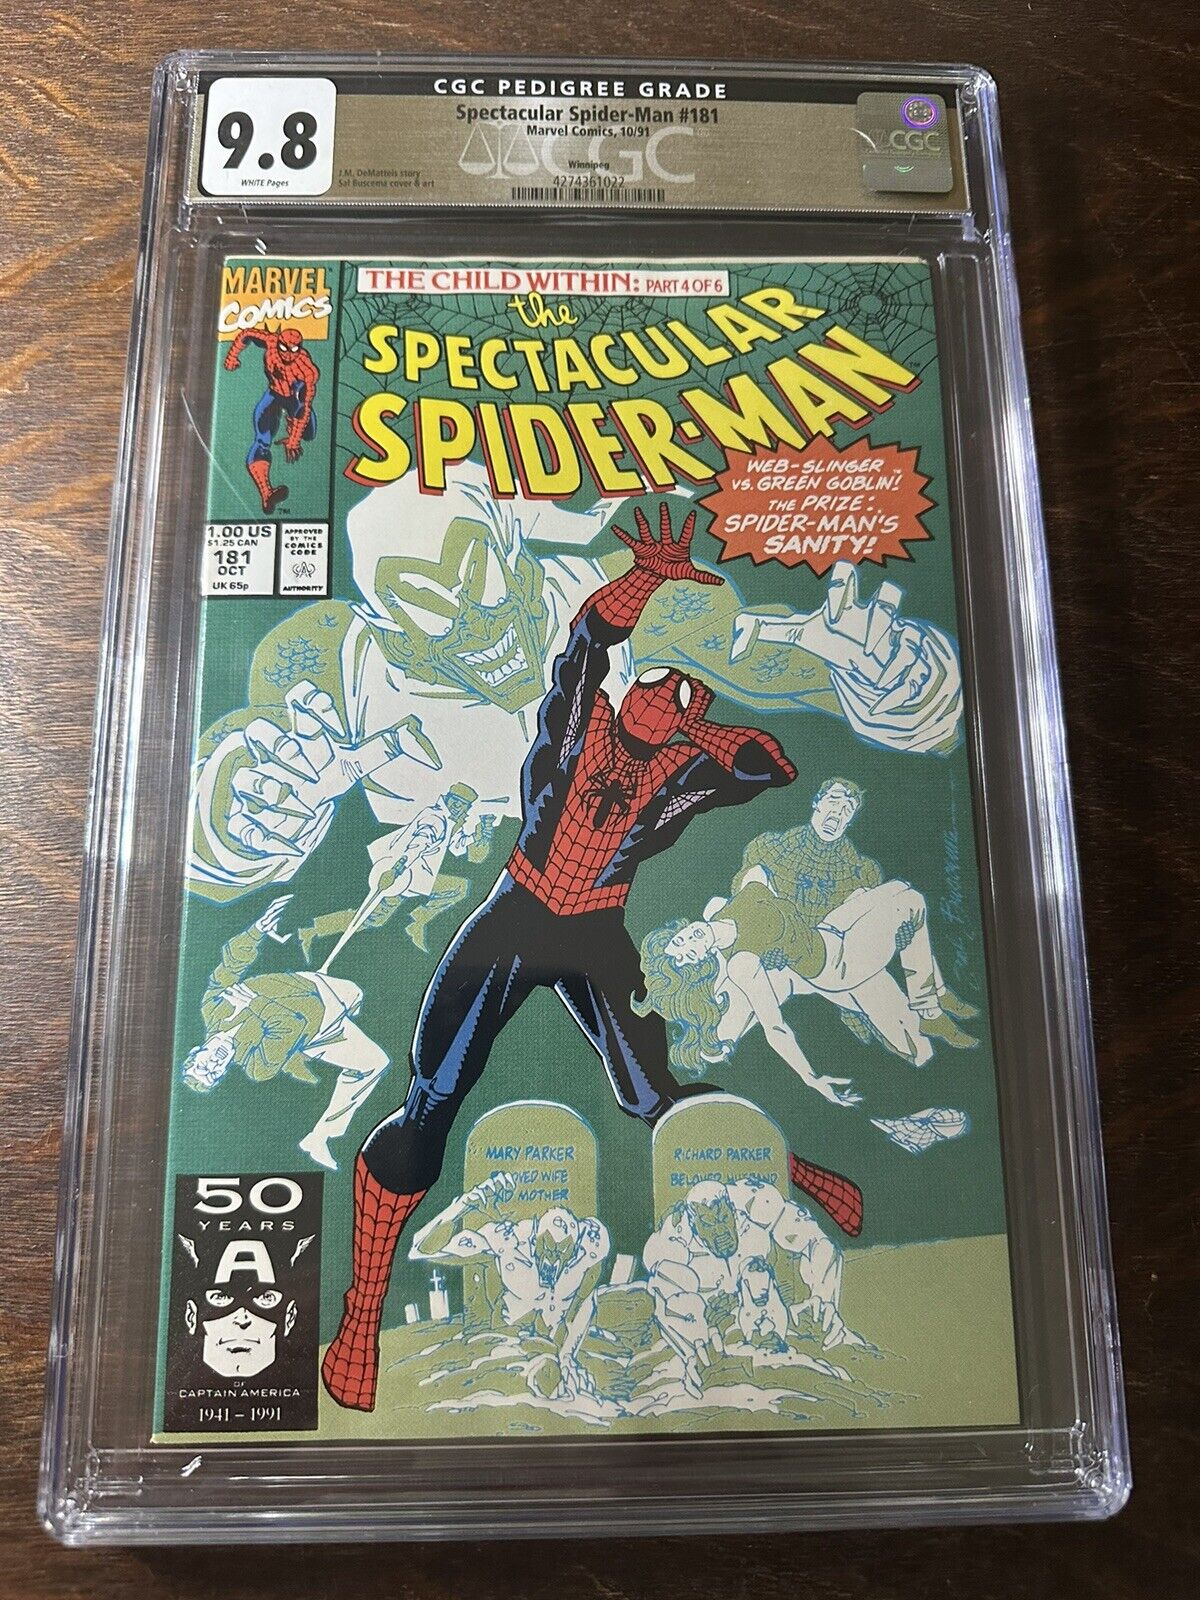 Spectacular Spider-Man # 181 CGC Pedigree 9.8 White Pages Marvel 10/91